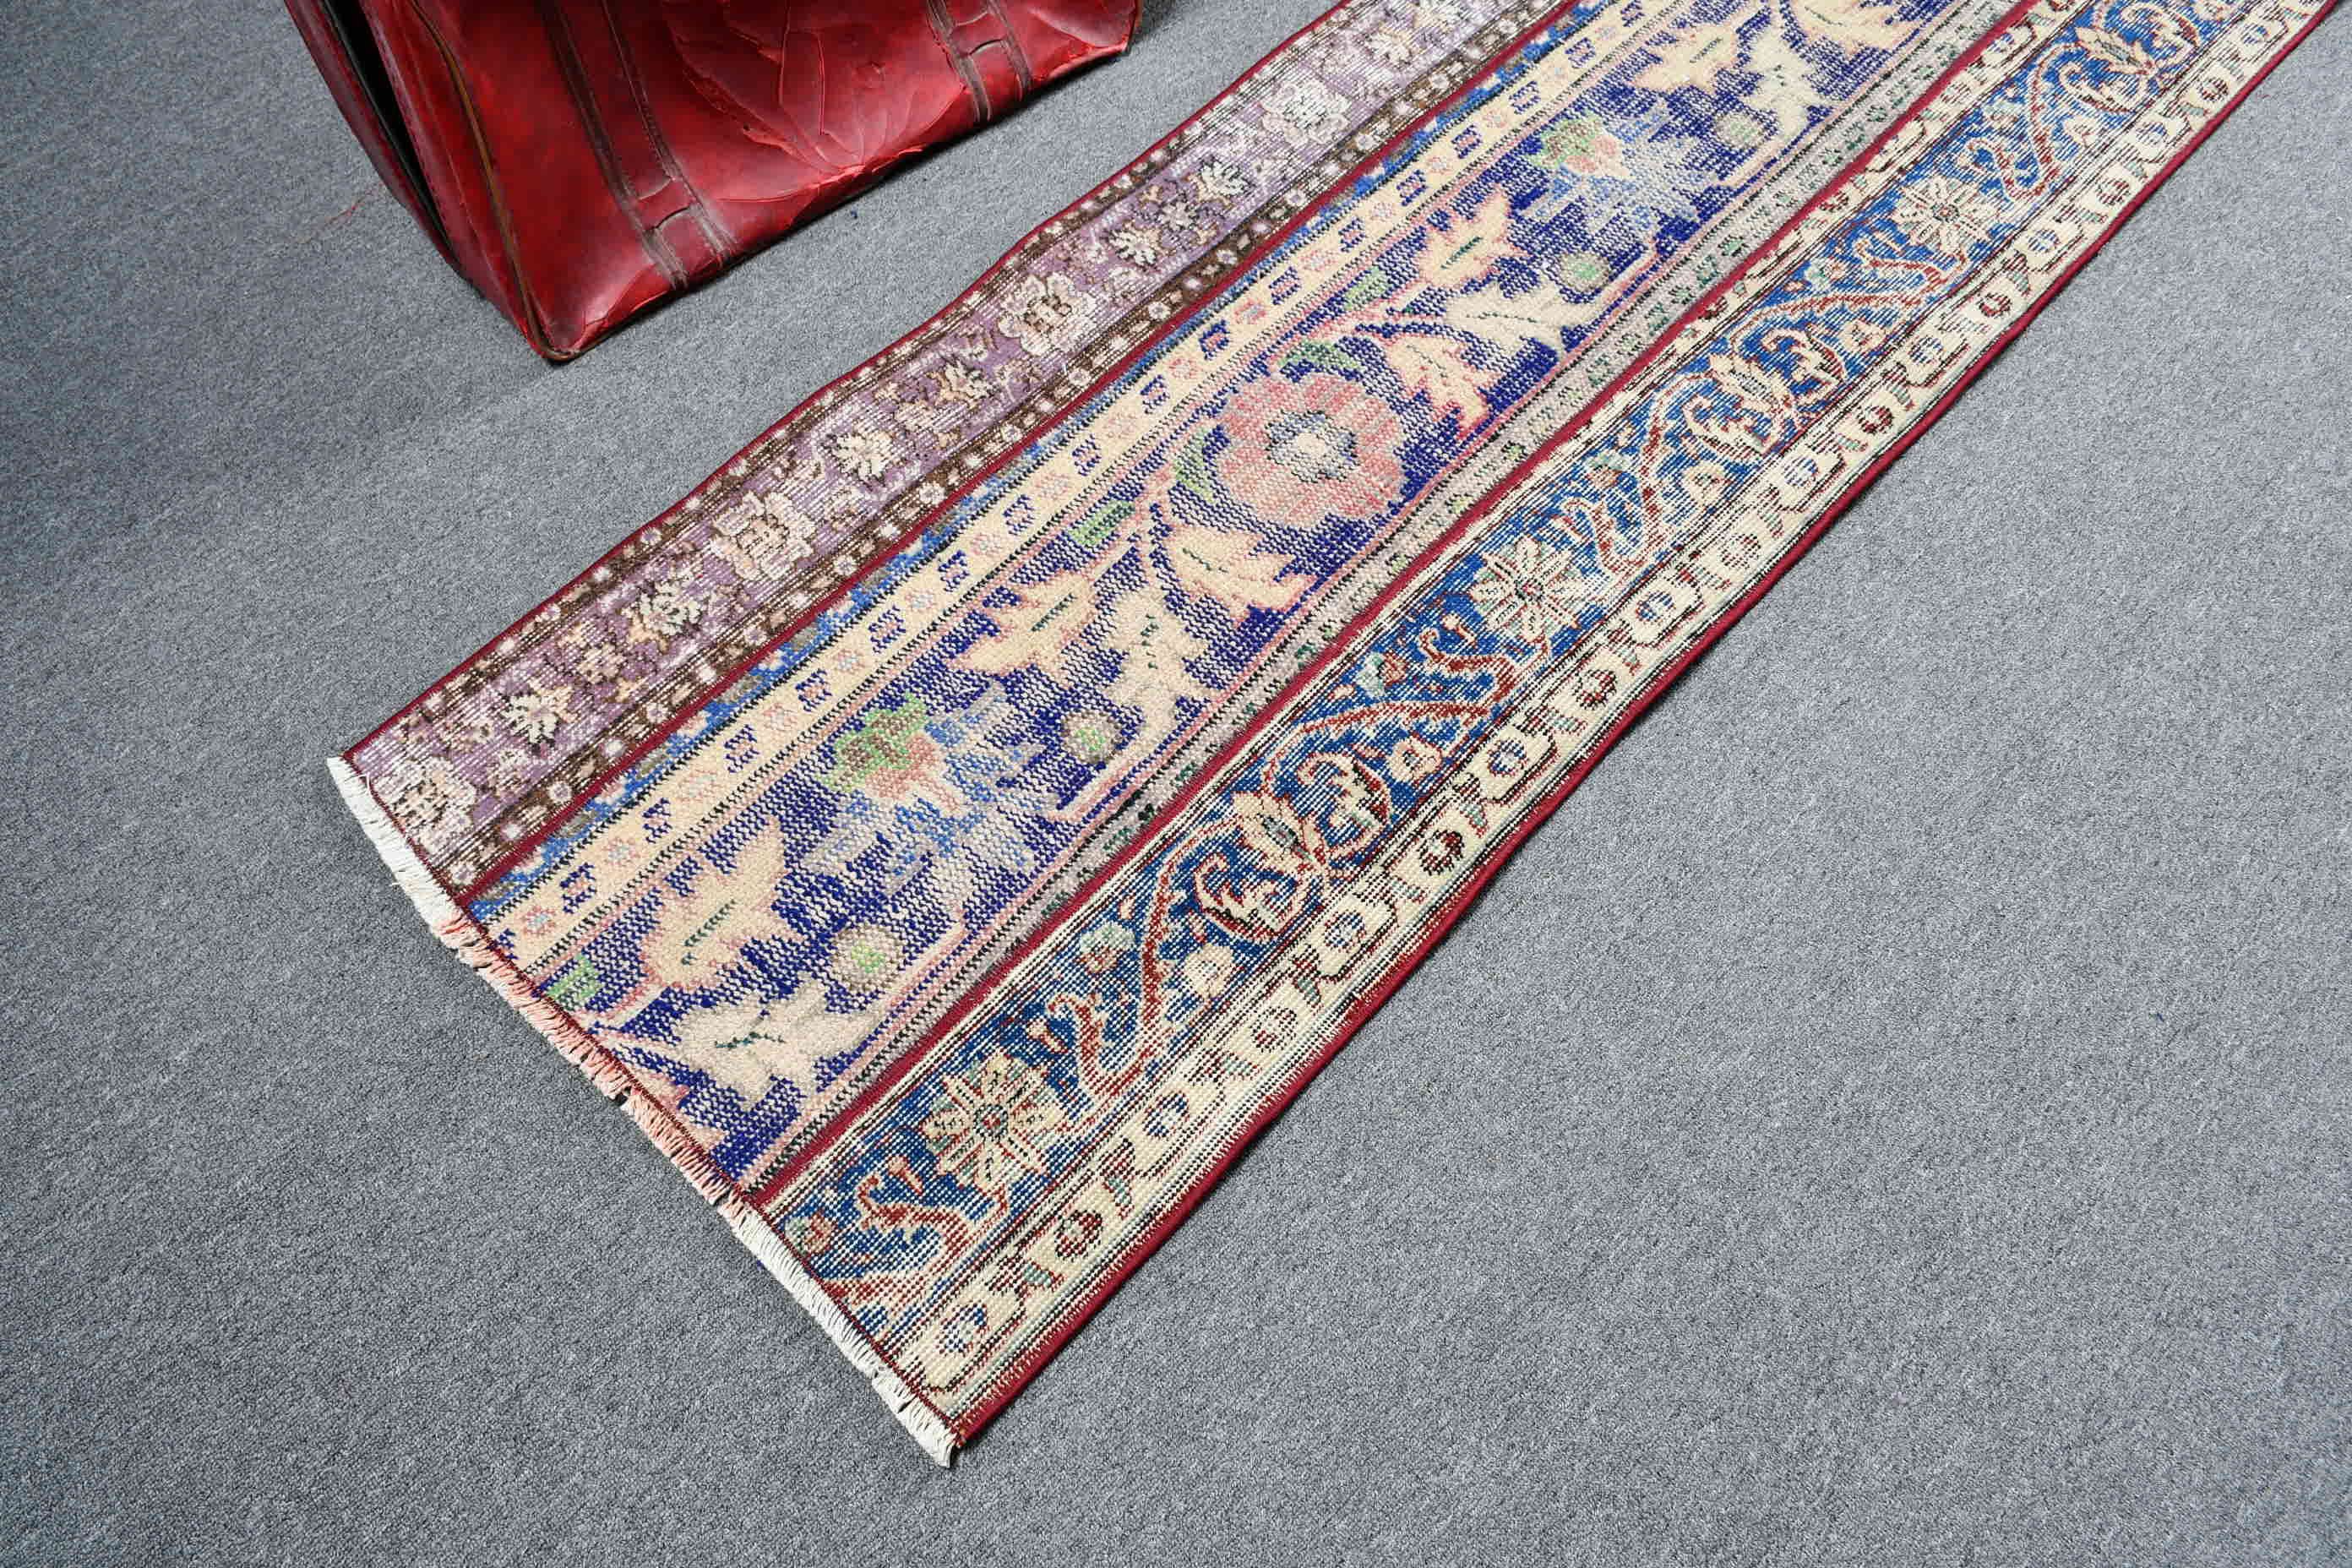 Abstract Rug, 2.2x8 ft Runner Rug, Turkish Rug, Moroccan Rugs, Kitchen Rugs, Stair Rugs, Vintage Rug, Home Decor Rugs, Blue Oriental Rugs